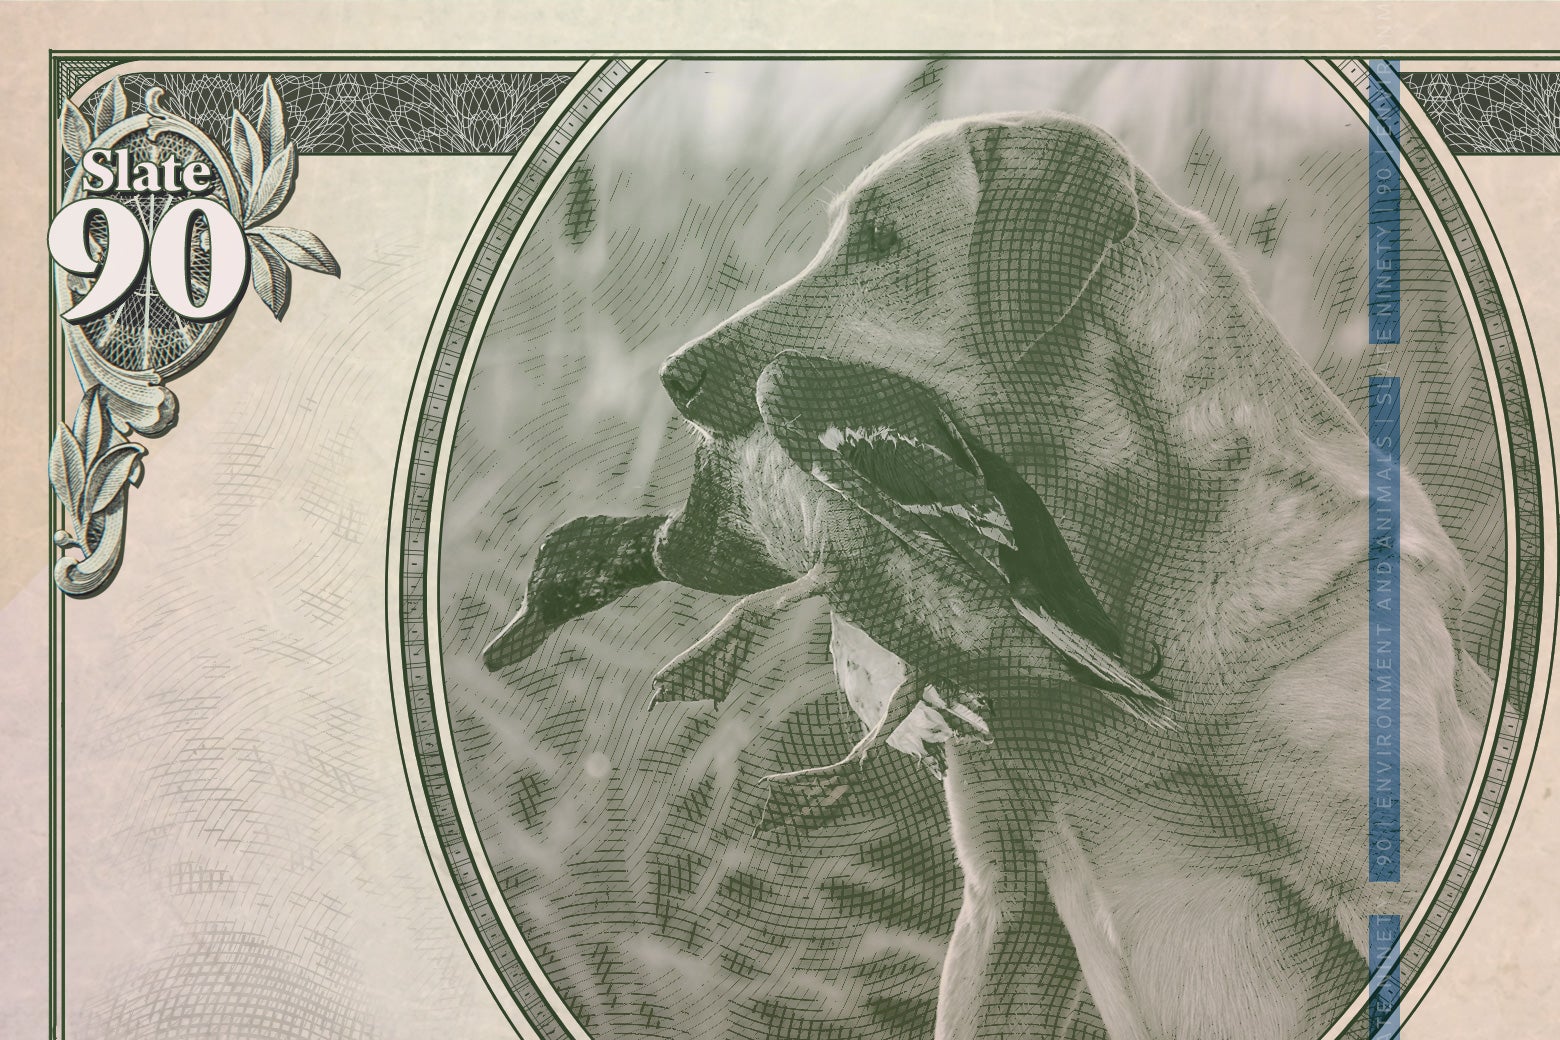 Paper currency showing a hunting dog with a duck in its mouth.